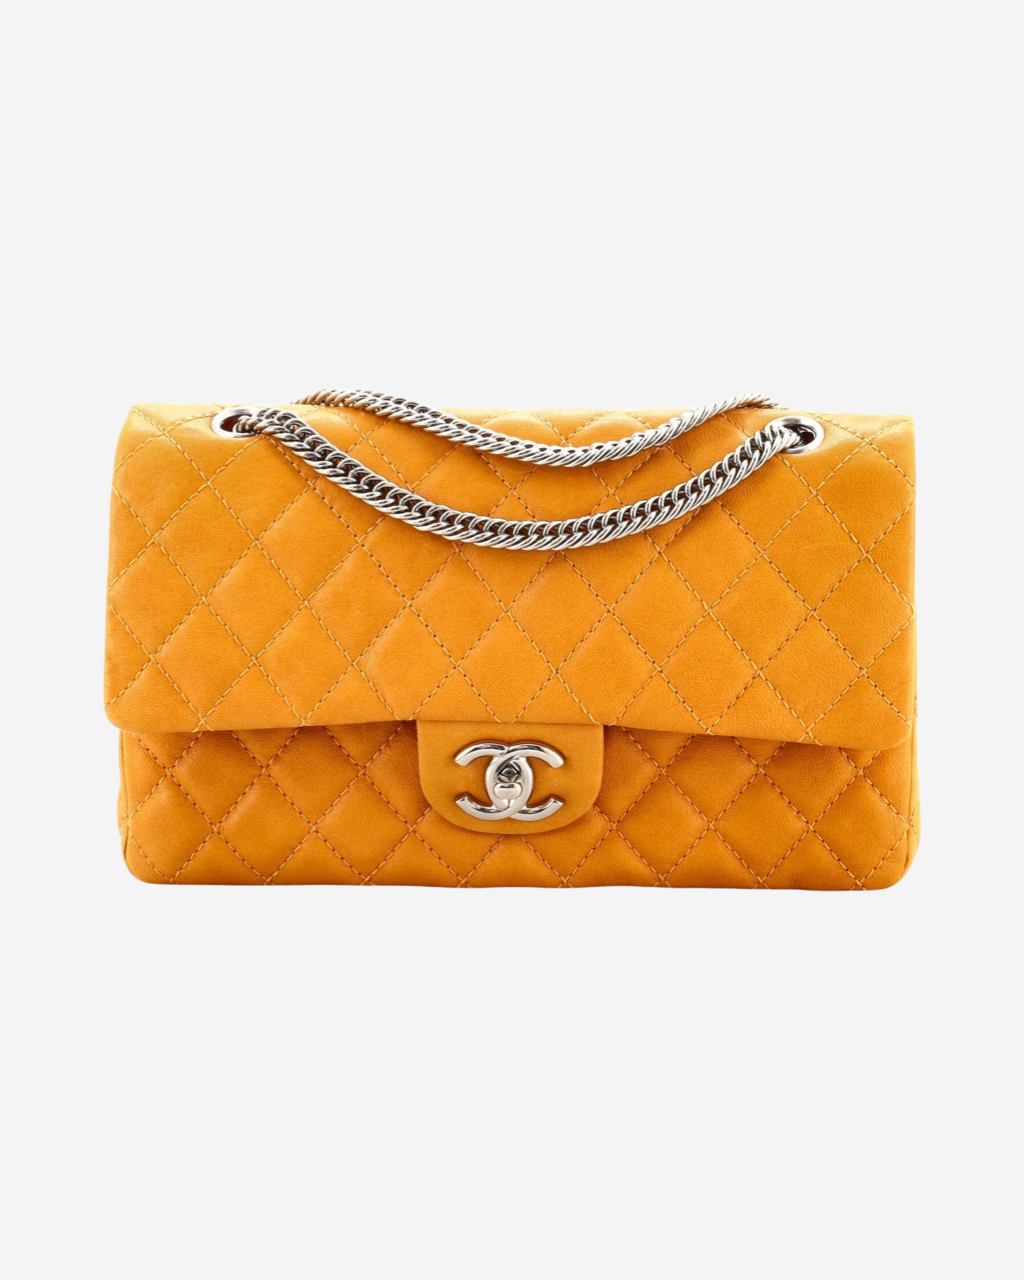 Chanel Classic Flap Small Bag